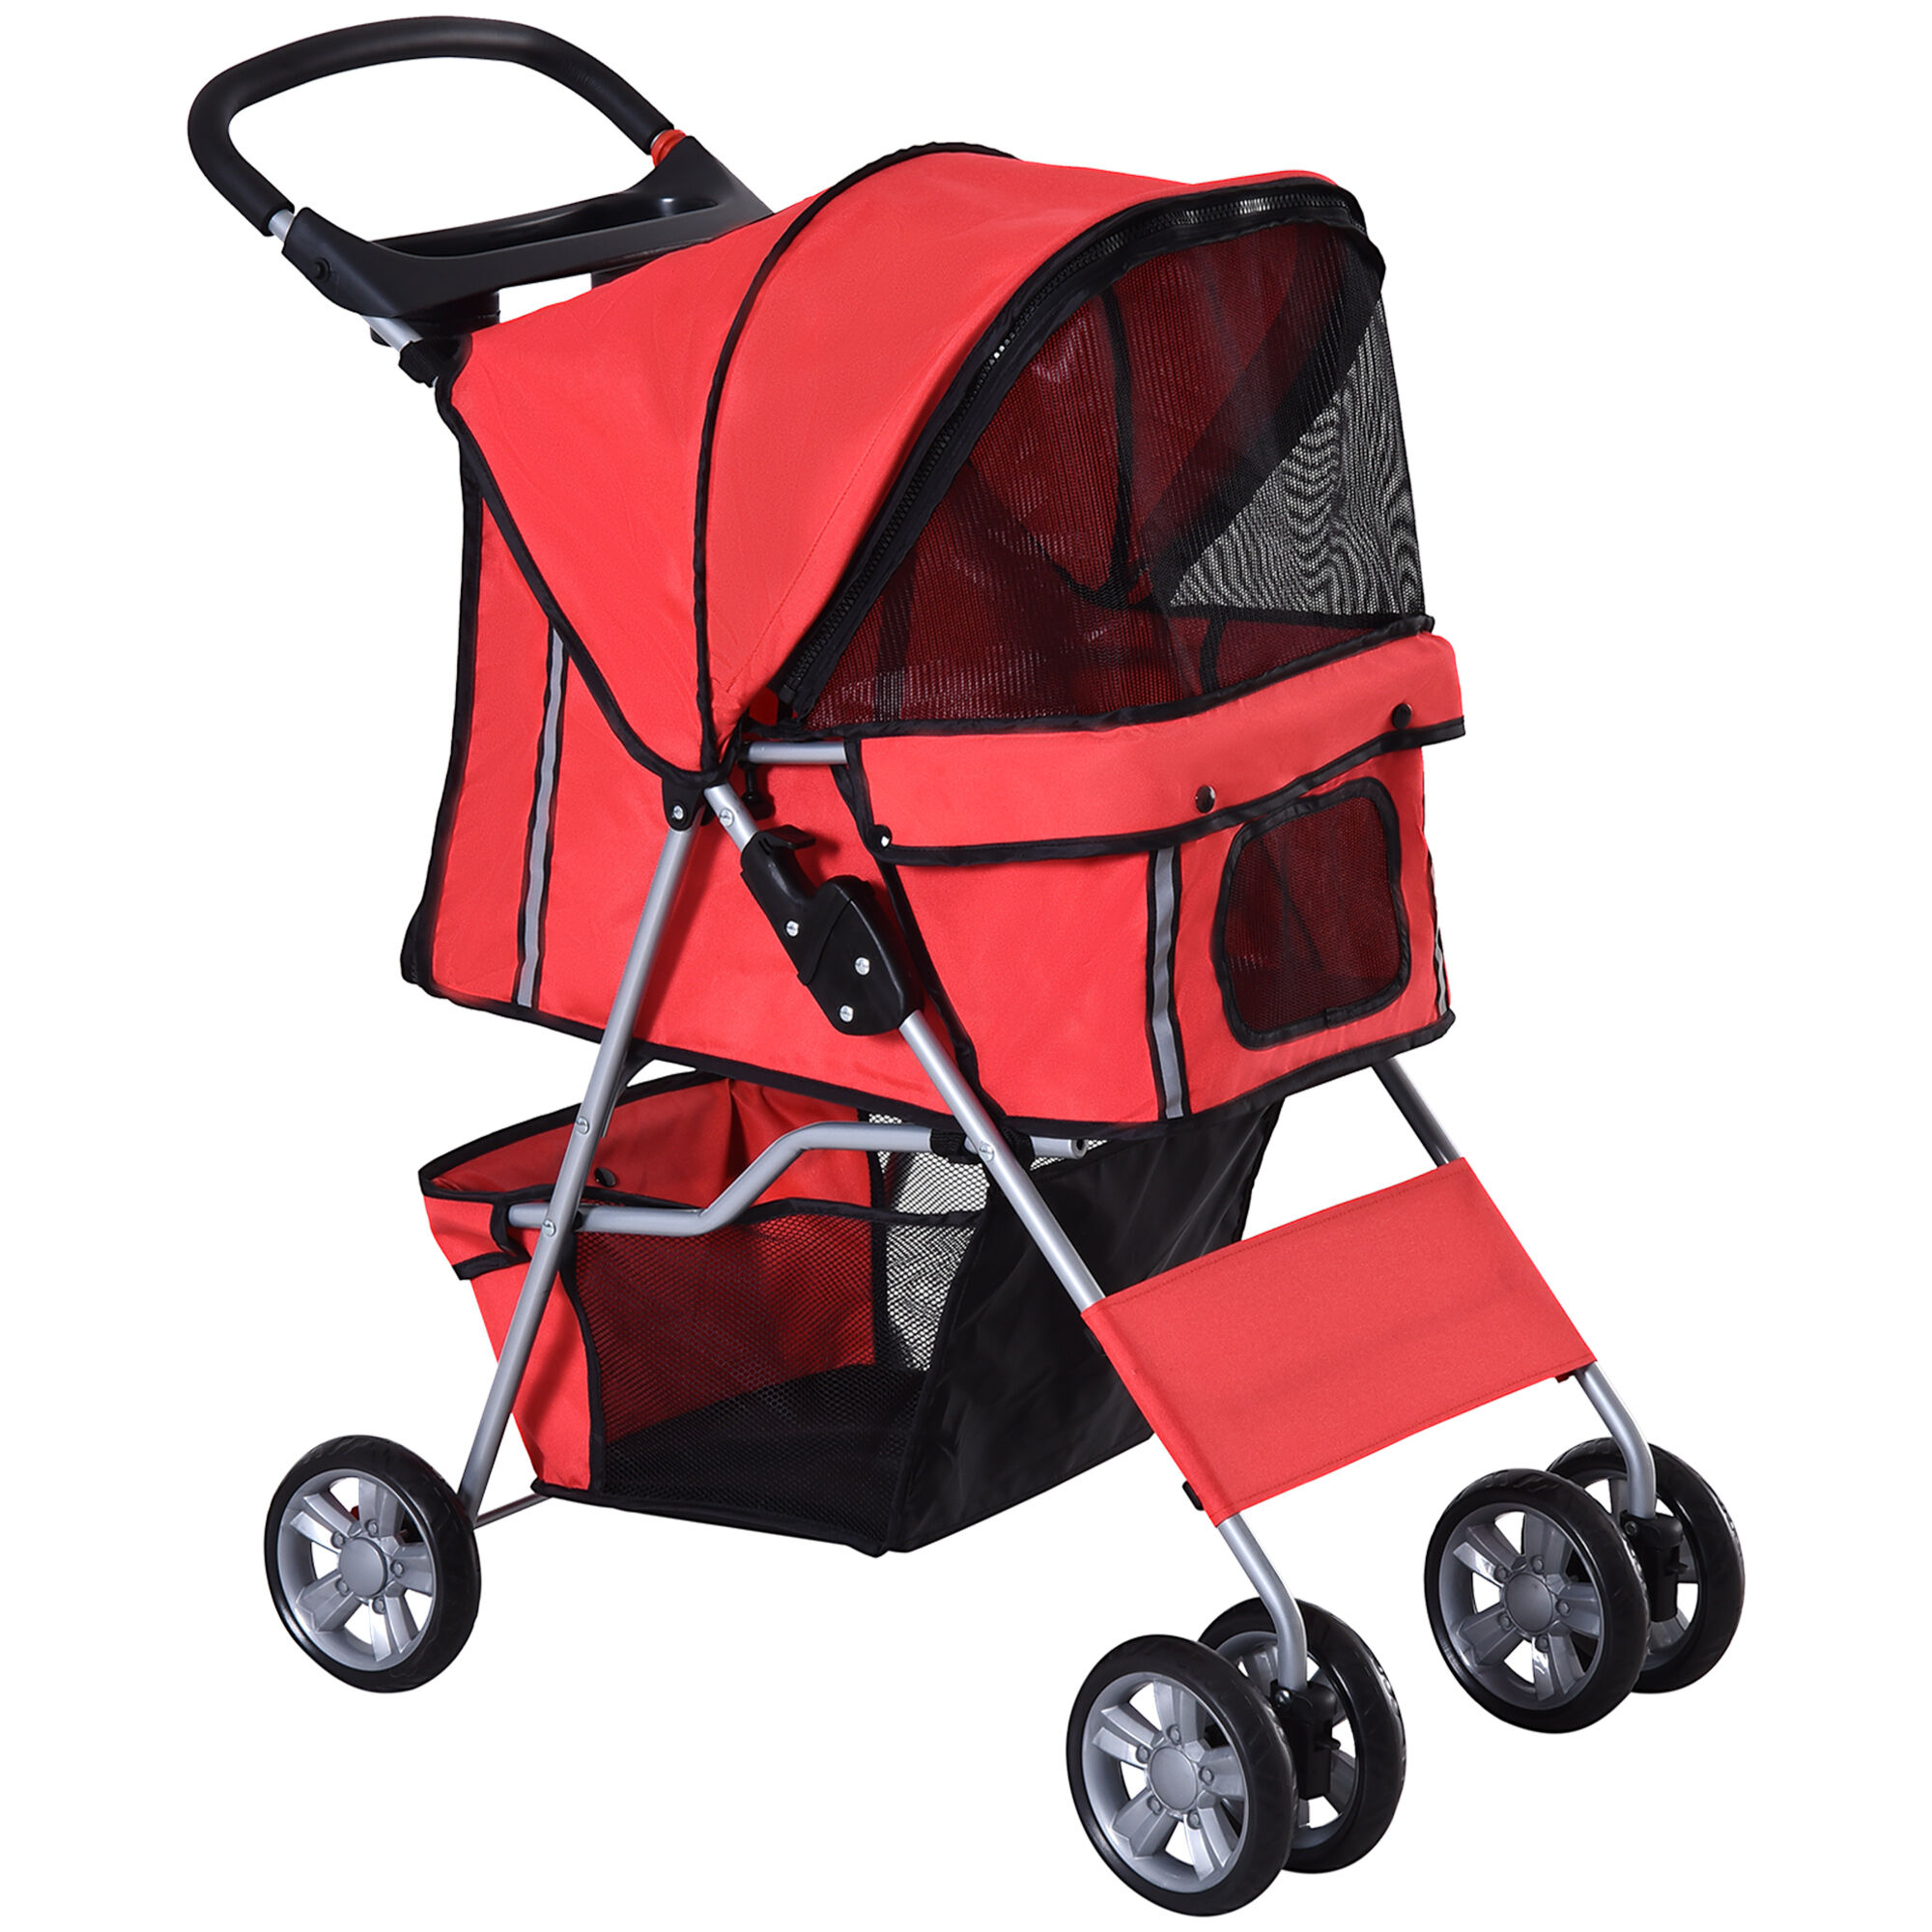 PawHut Pet Stroller, Dog Pram, Foldable Pushchair, Cat Travel Carriage with Wheels, Zipper Entry, for Small Pets, Red